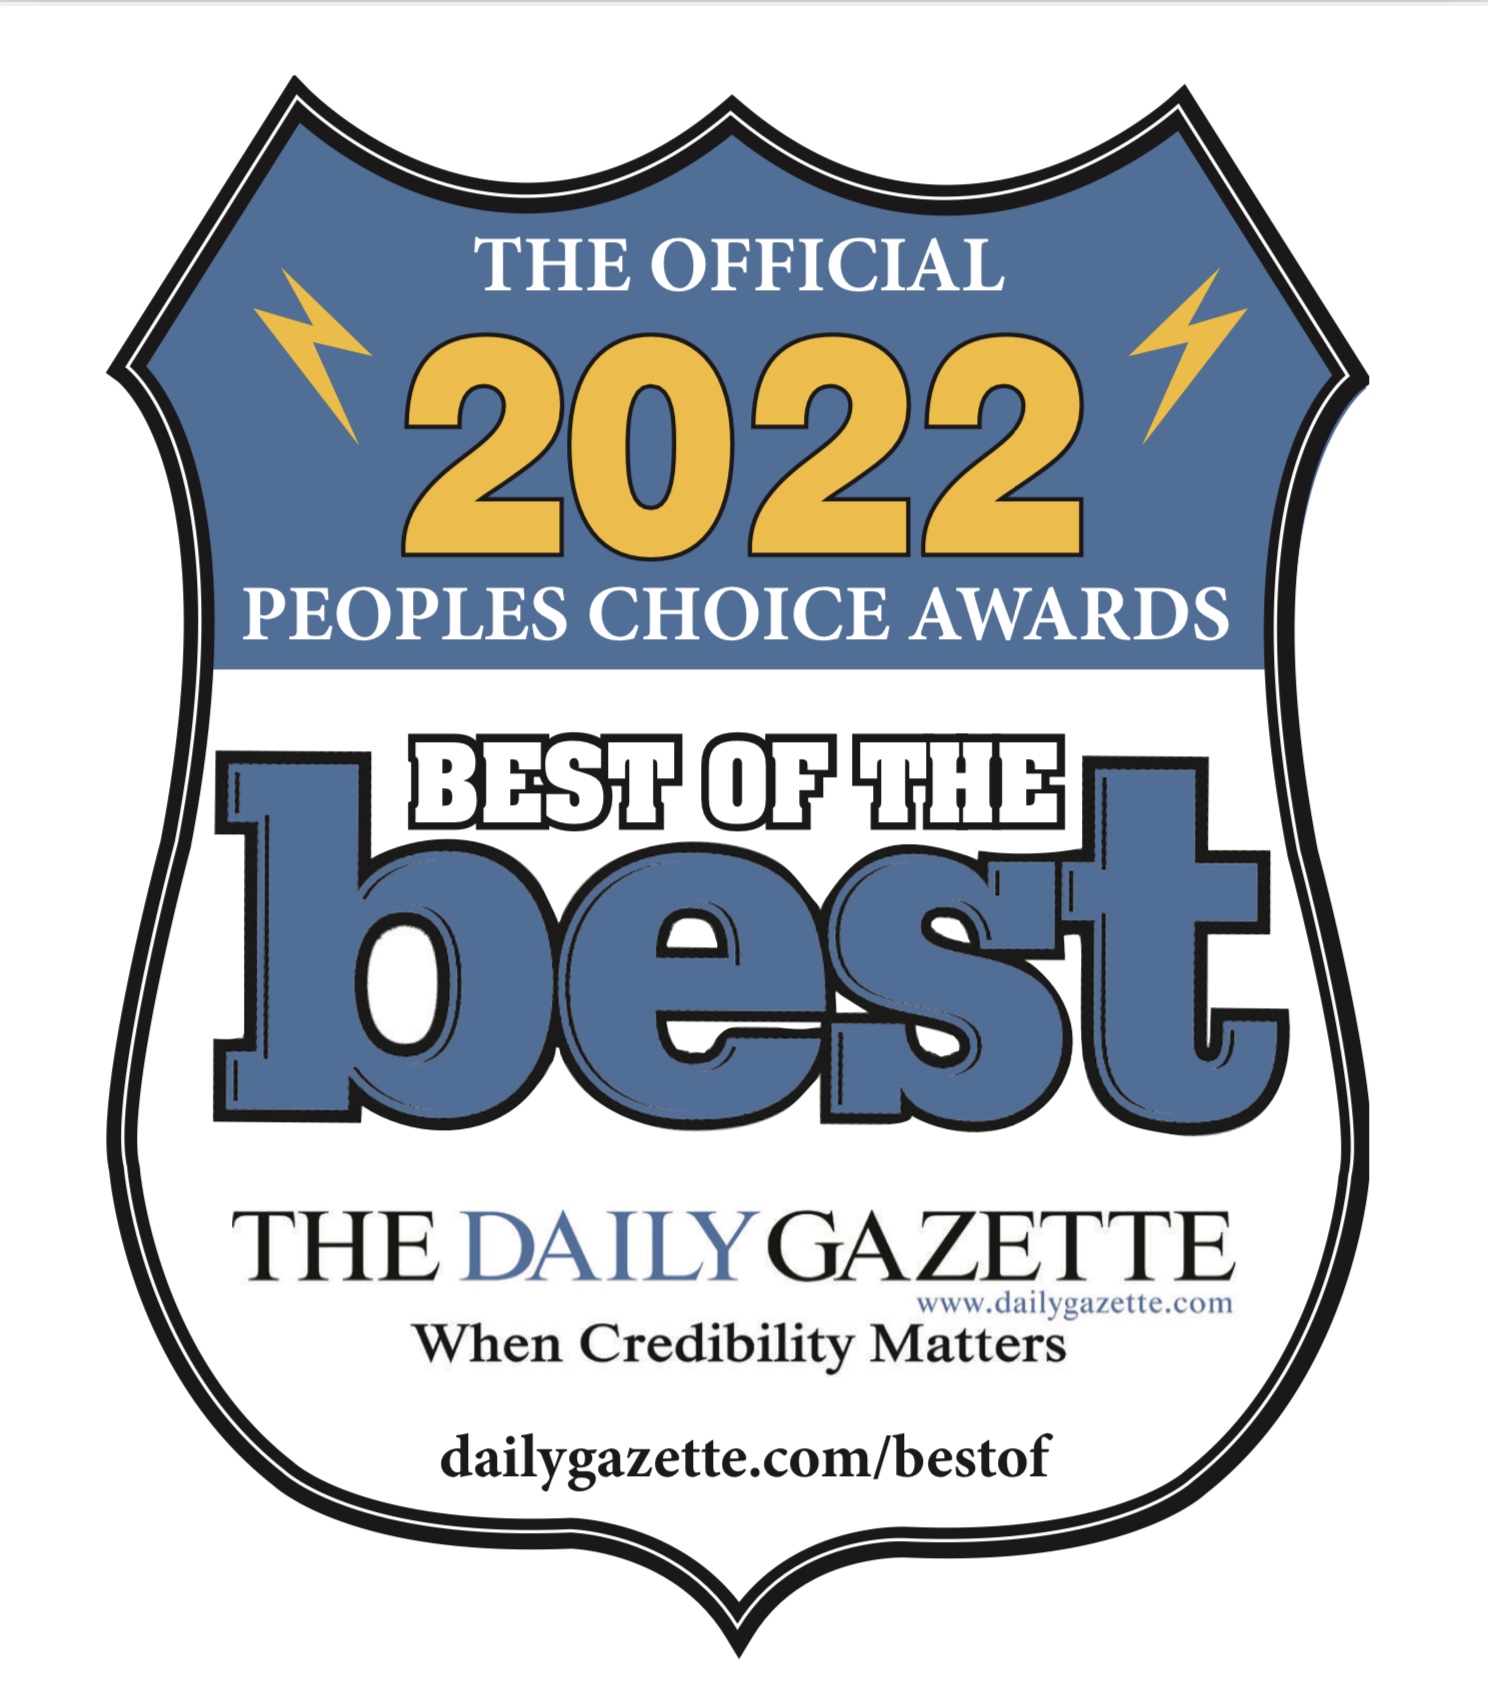 ND-BG Voted Best of the Best